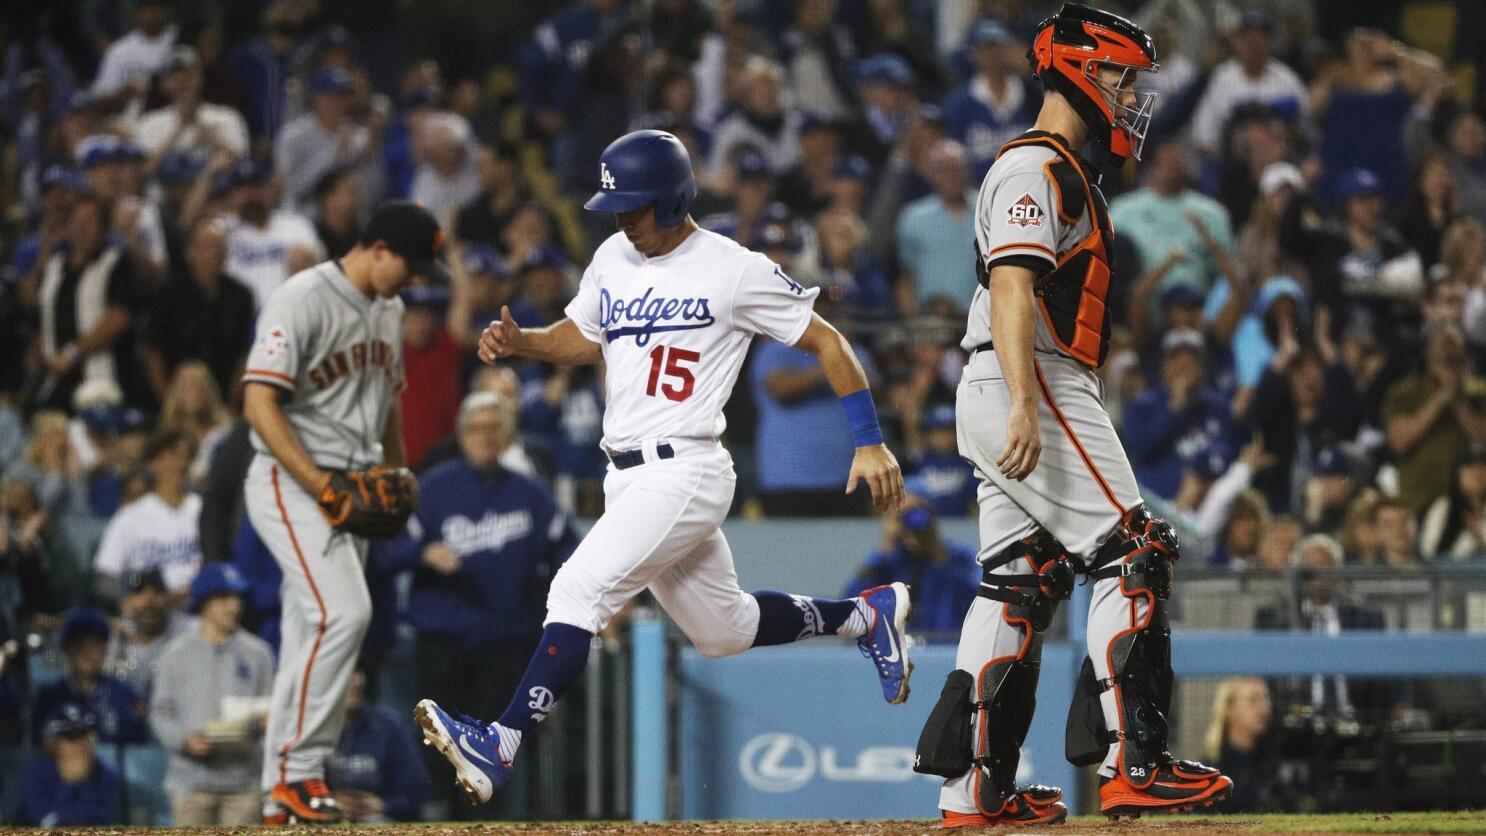 Dodgers shut out Giants 5-0 for first win of season - Los Angeles